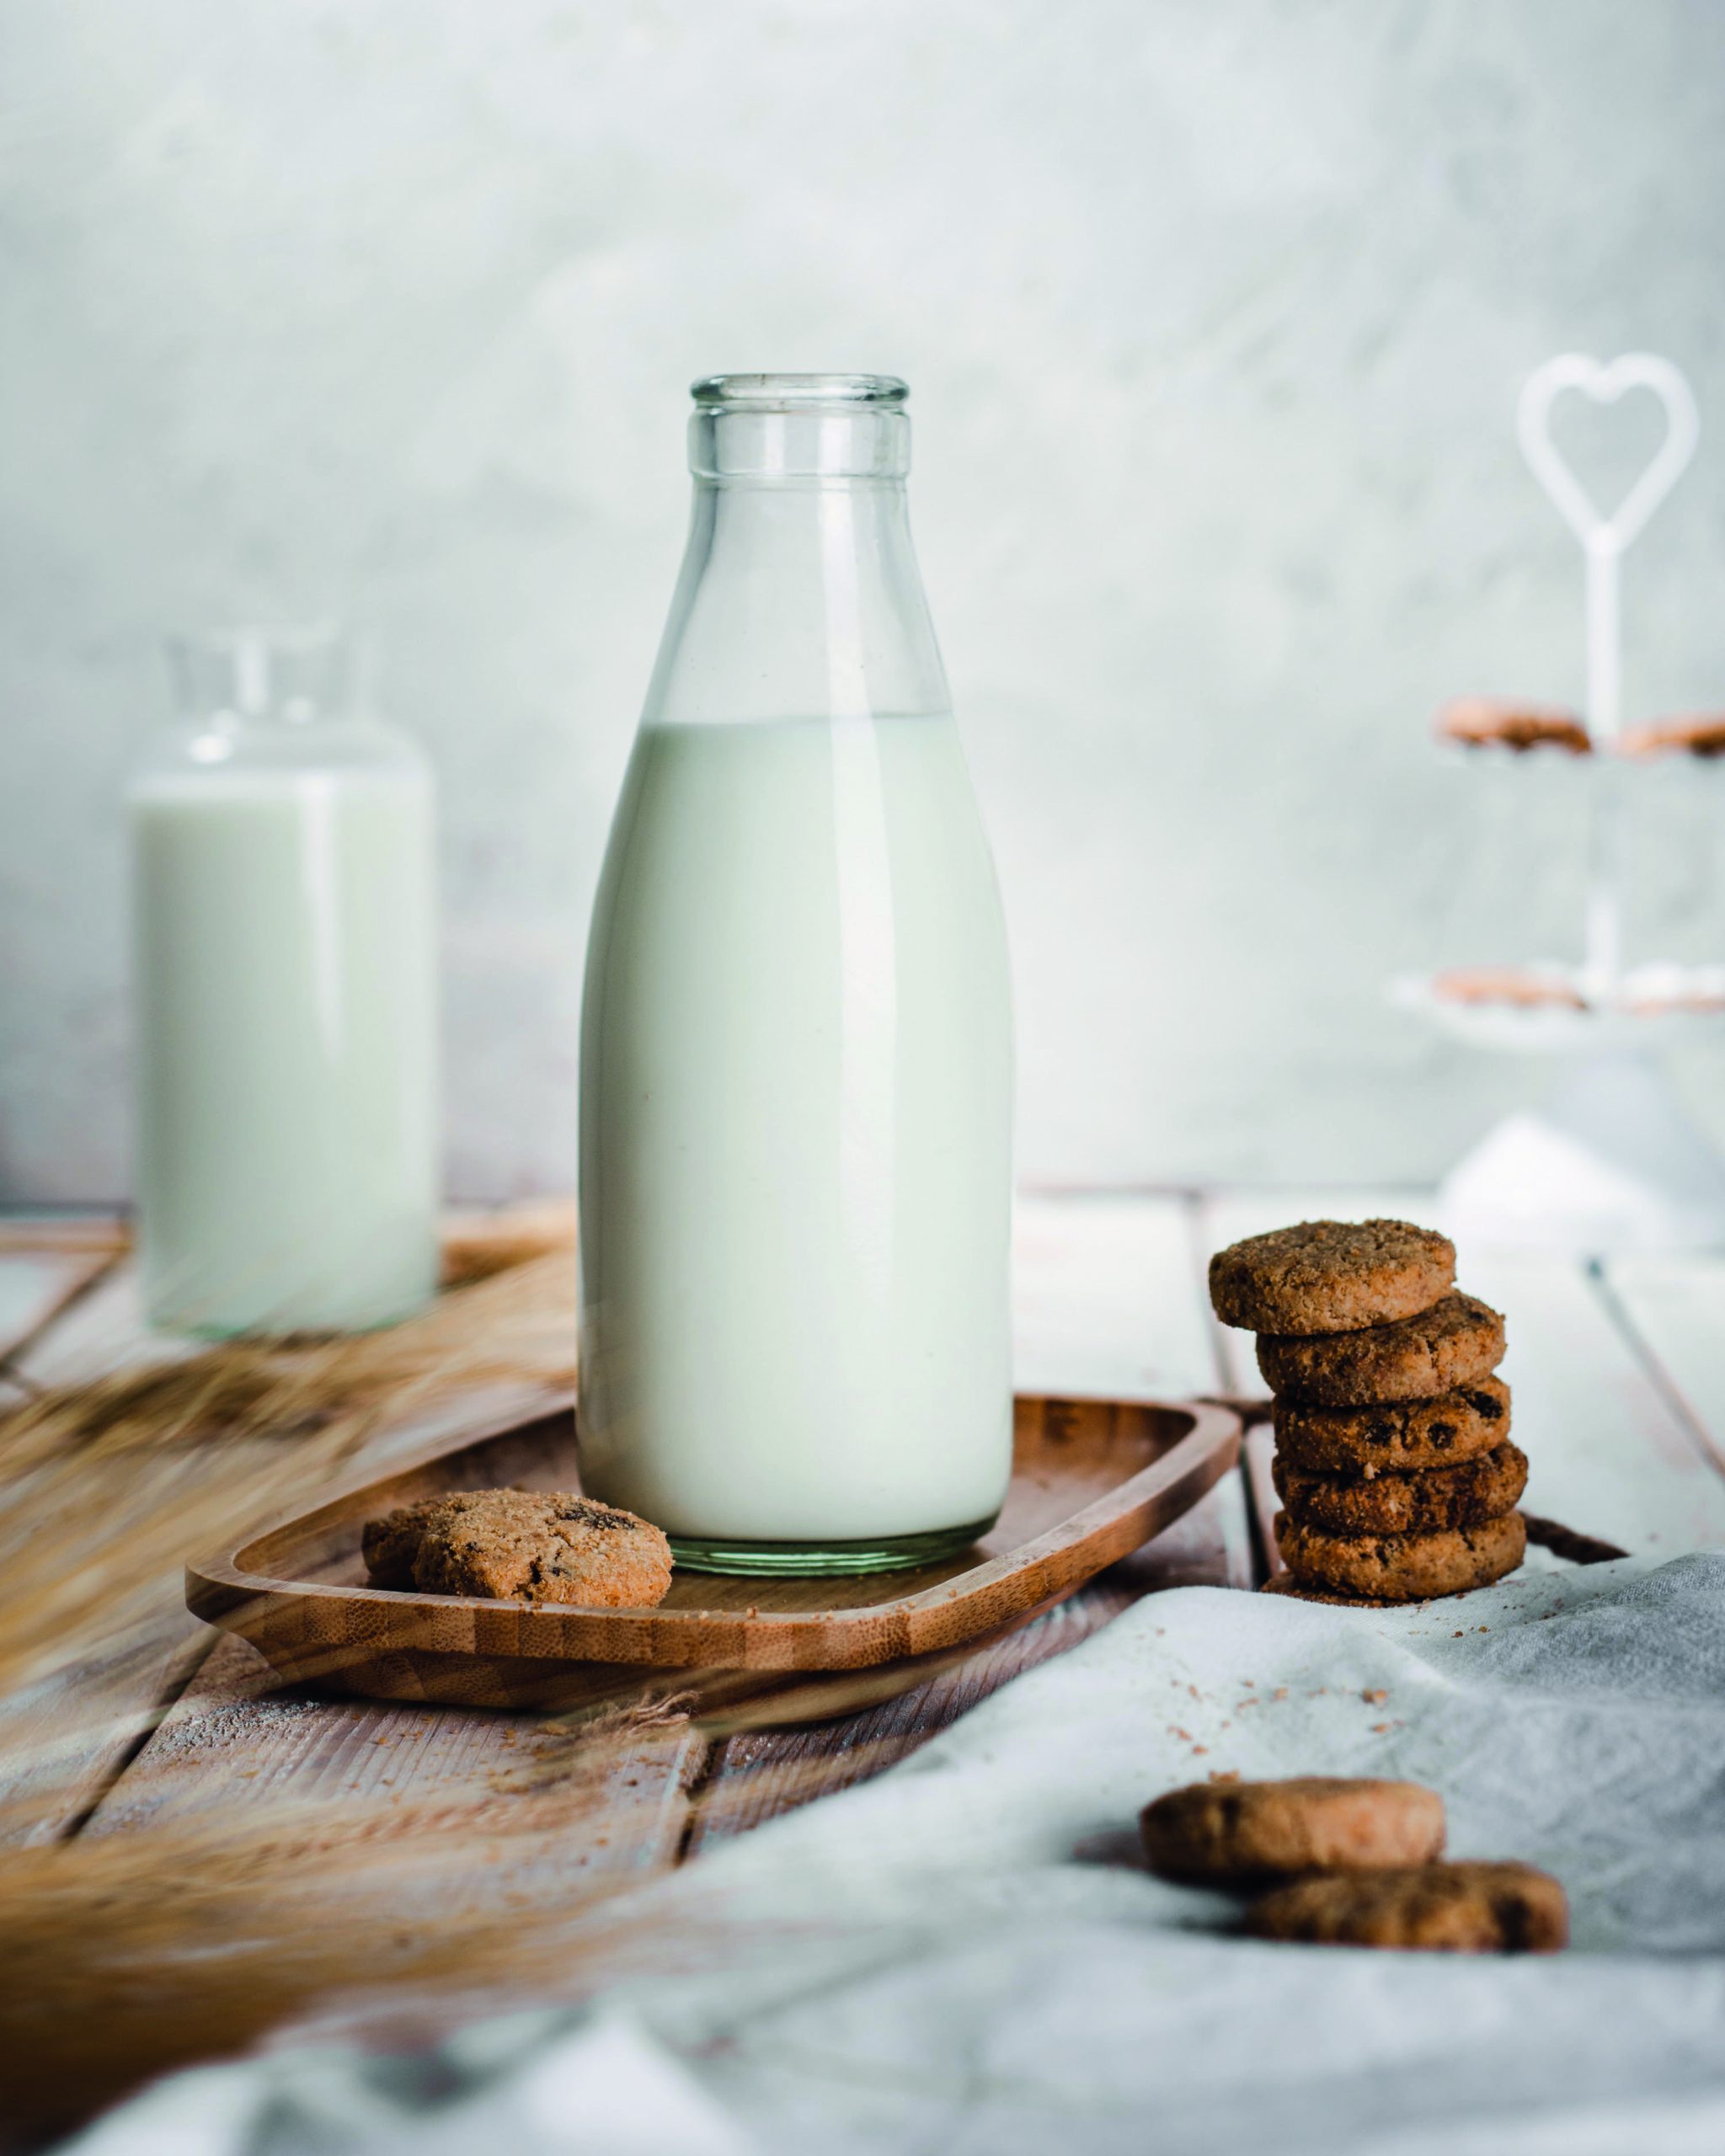 How to Make Kefir: All About the Probiotic Drink | Food &amp; Home Magazine